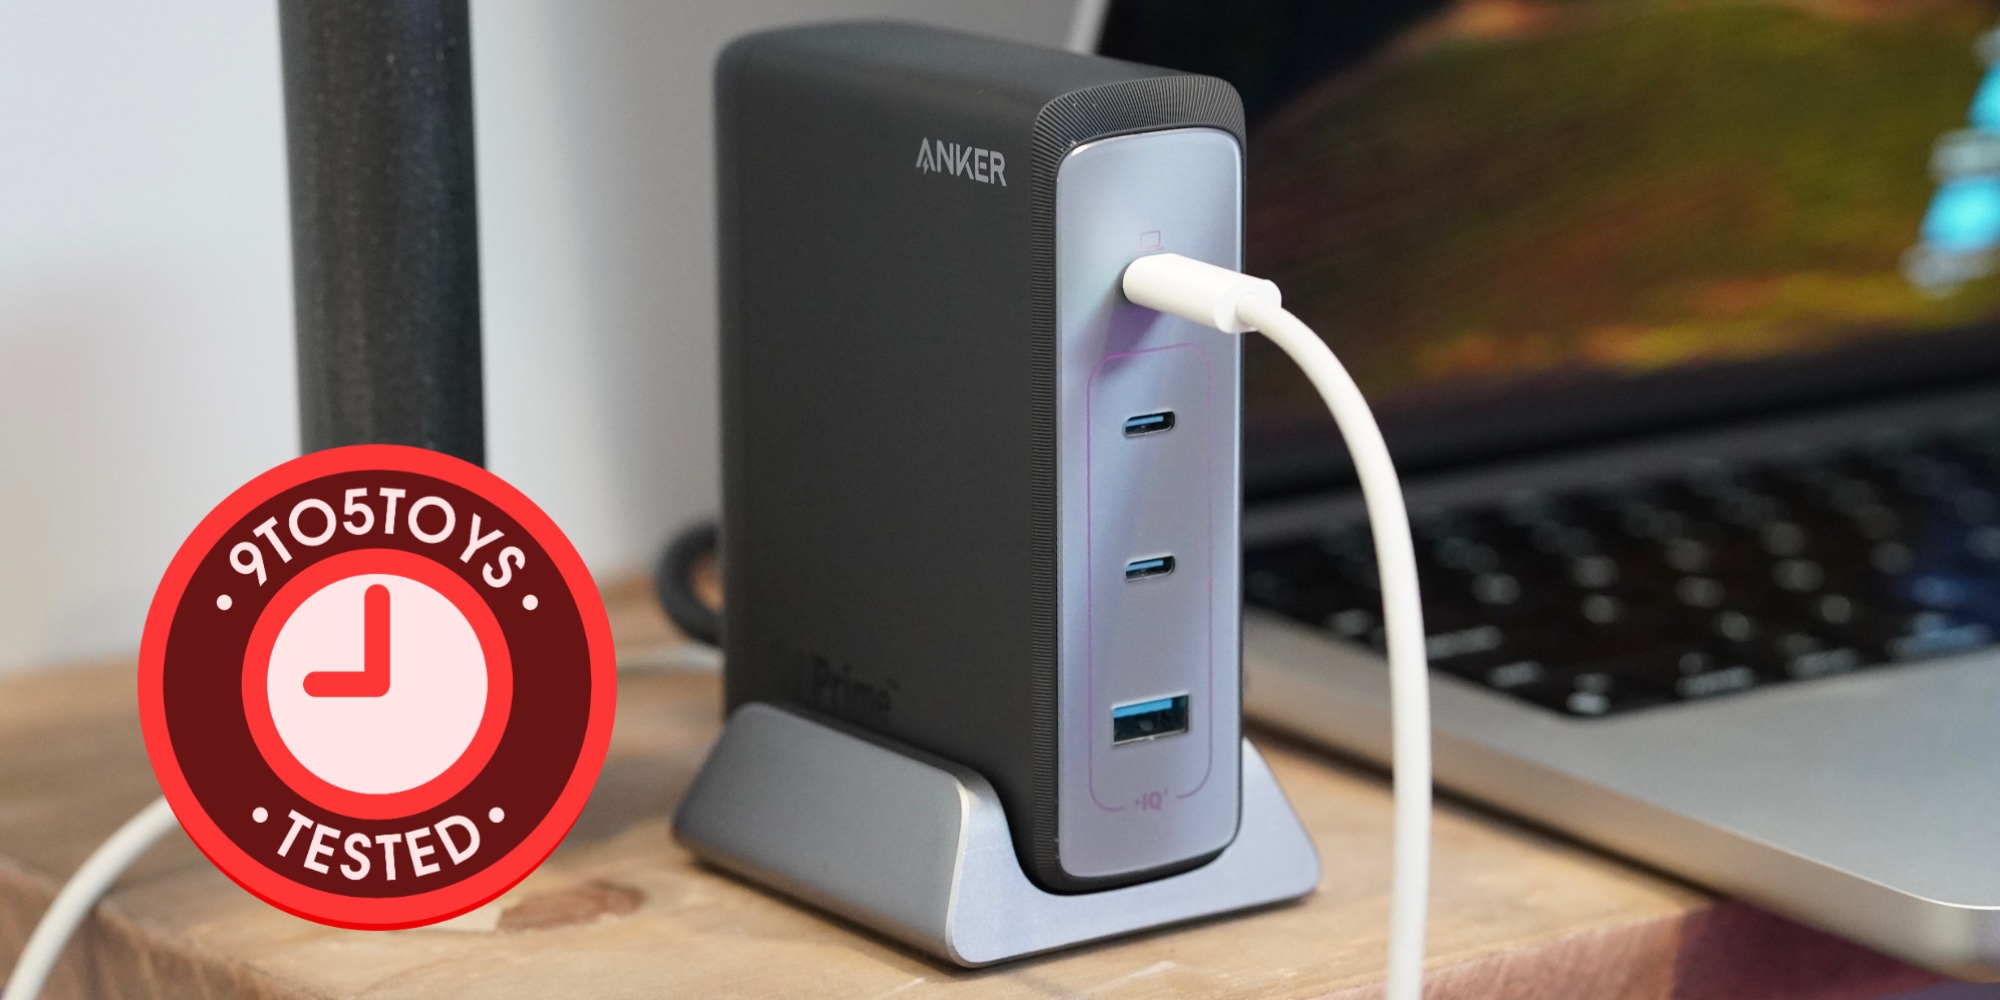 Anker's new USB-C Nano Power Bank is fit for iPhone 15, sees first discount  to $25.50